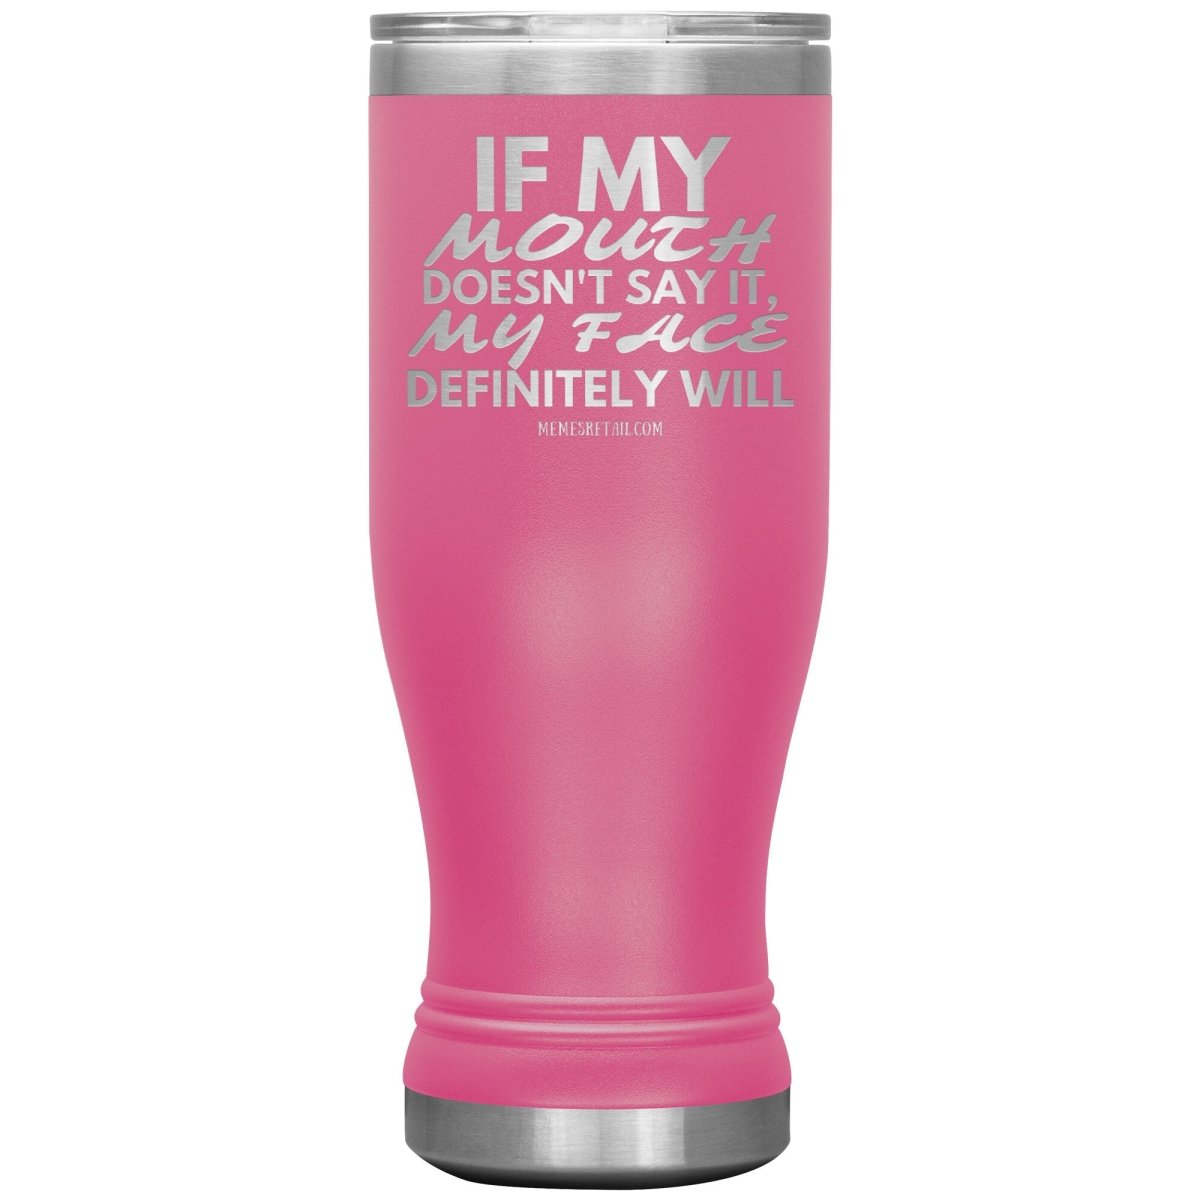 If my mouth doesn't say it, my face definitely will Tumblers, 20oz BOHO Insulated Tumbler / Pink - MemesRetail.com